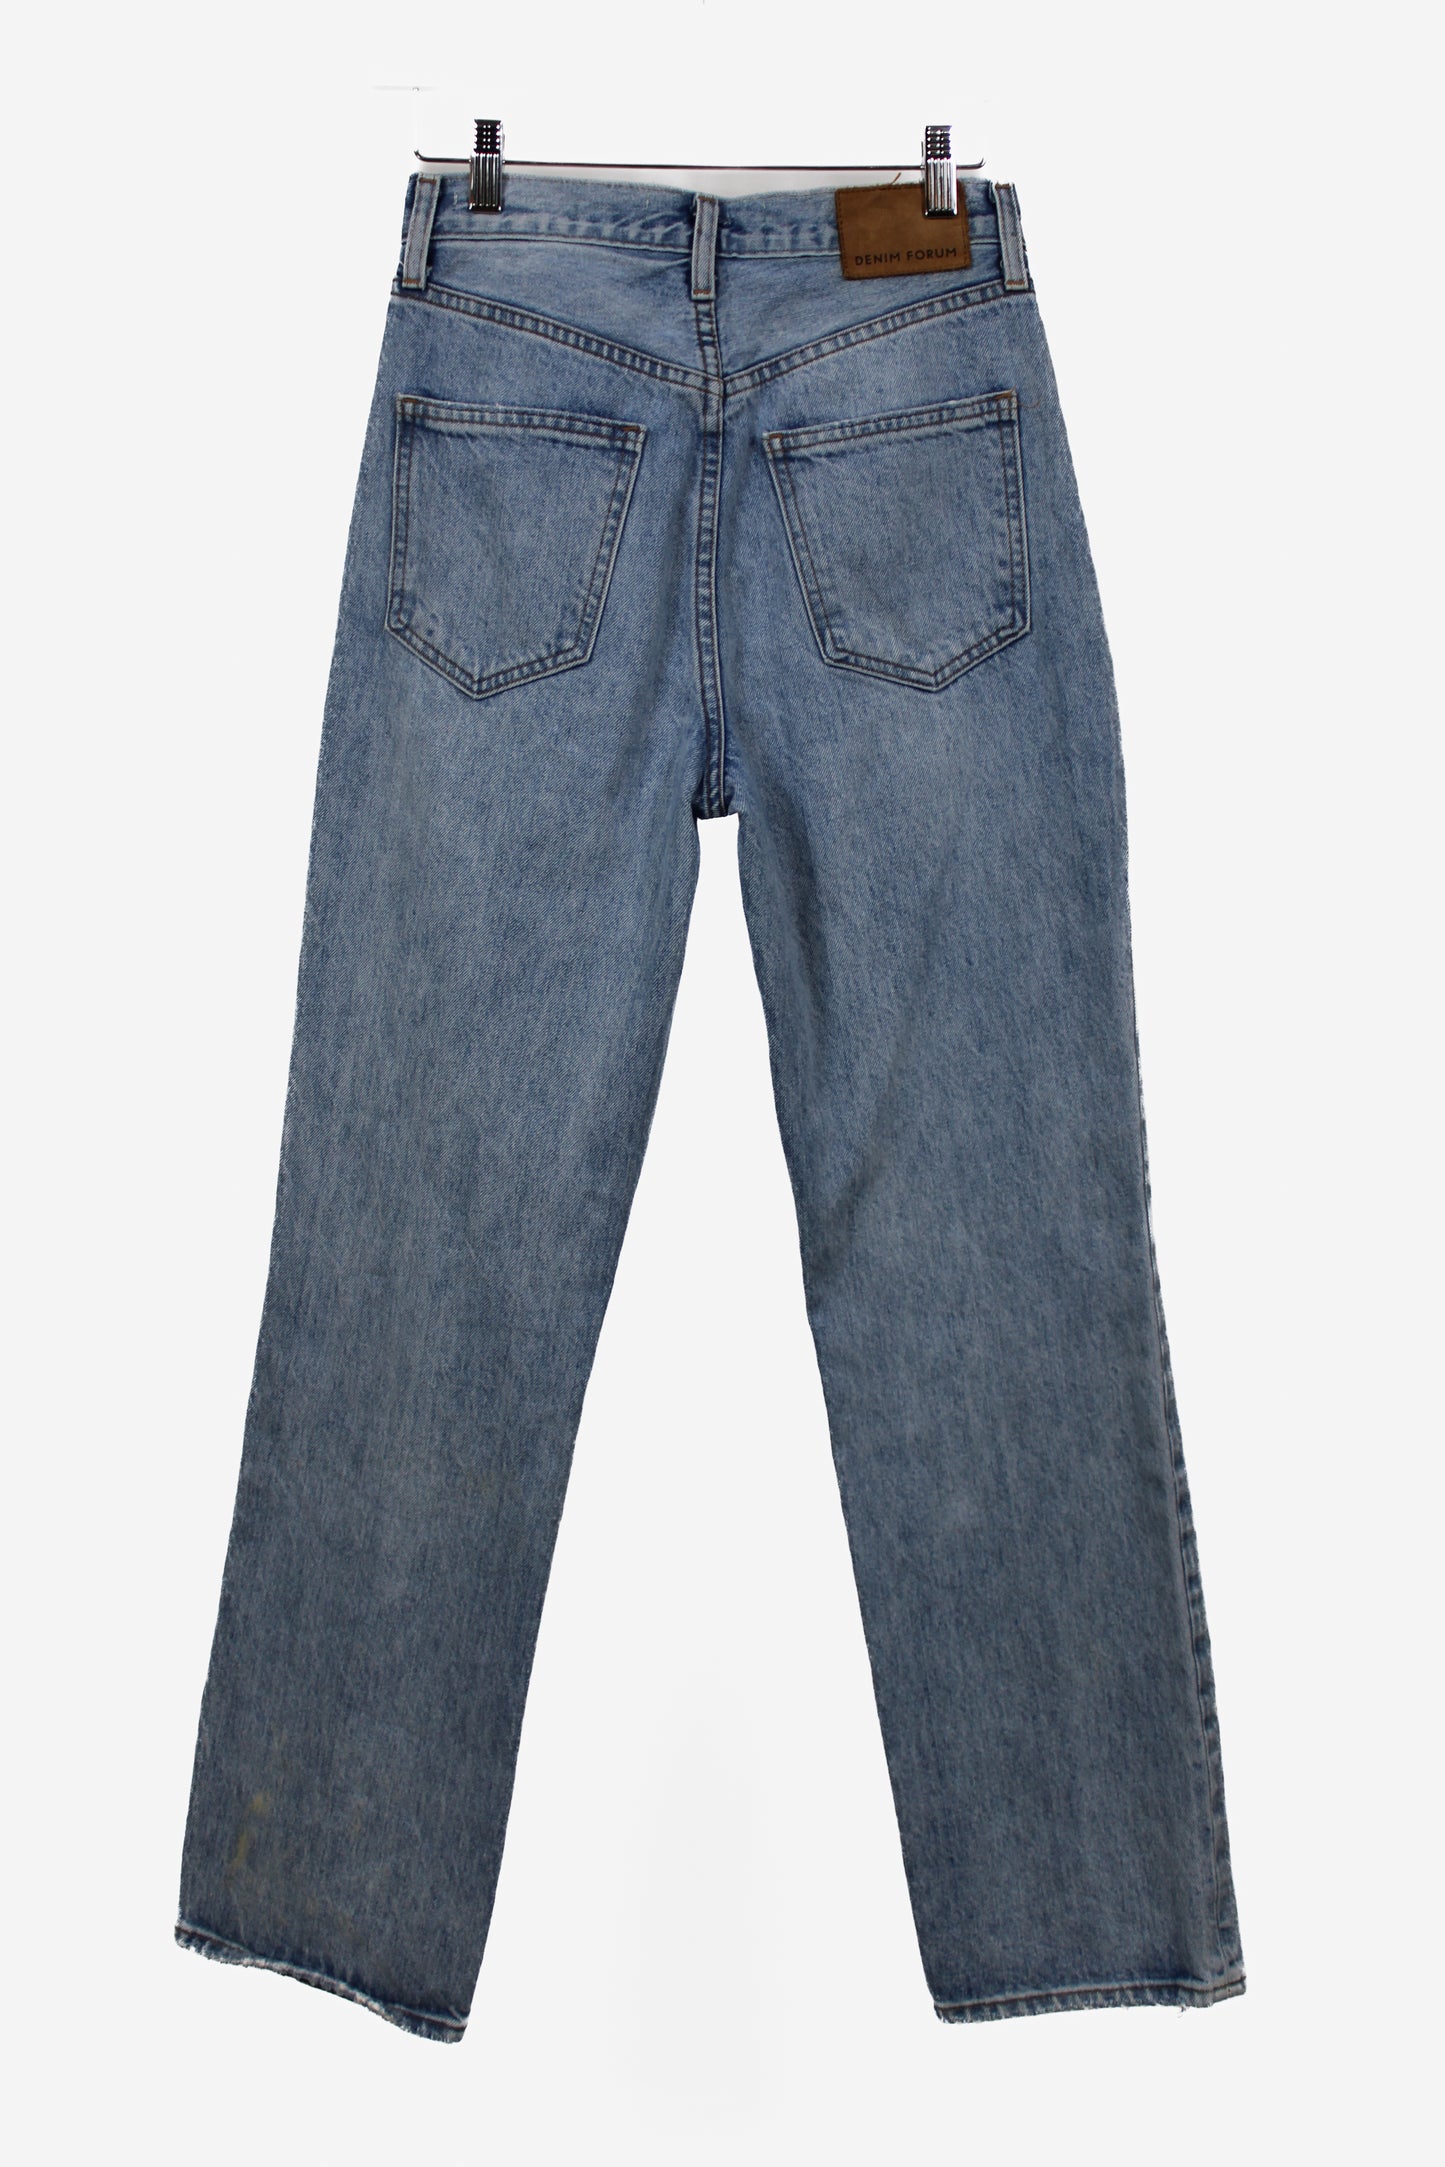 High Rise Loose Light Wash Blue Jeans